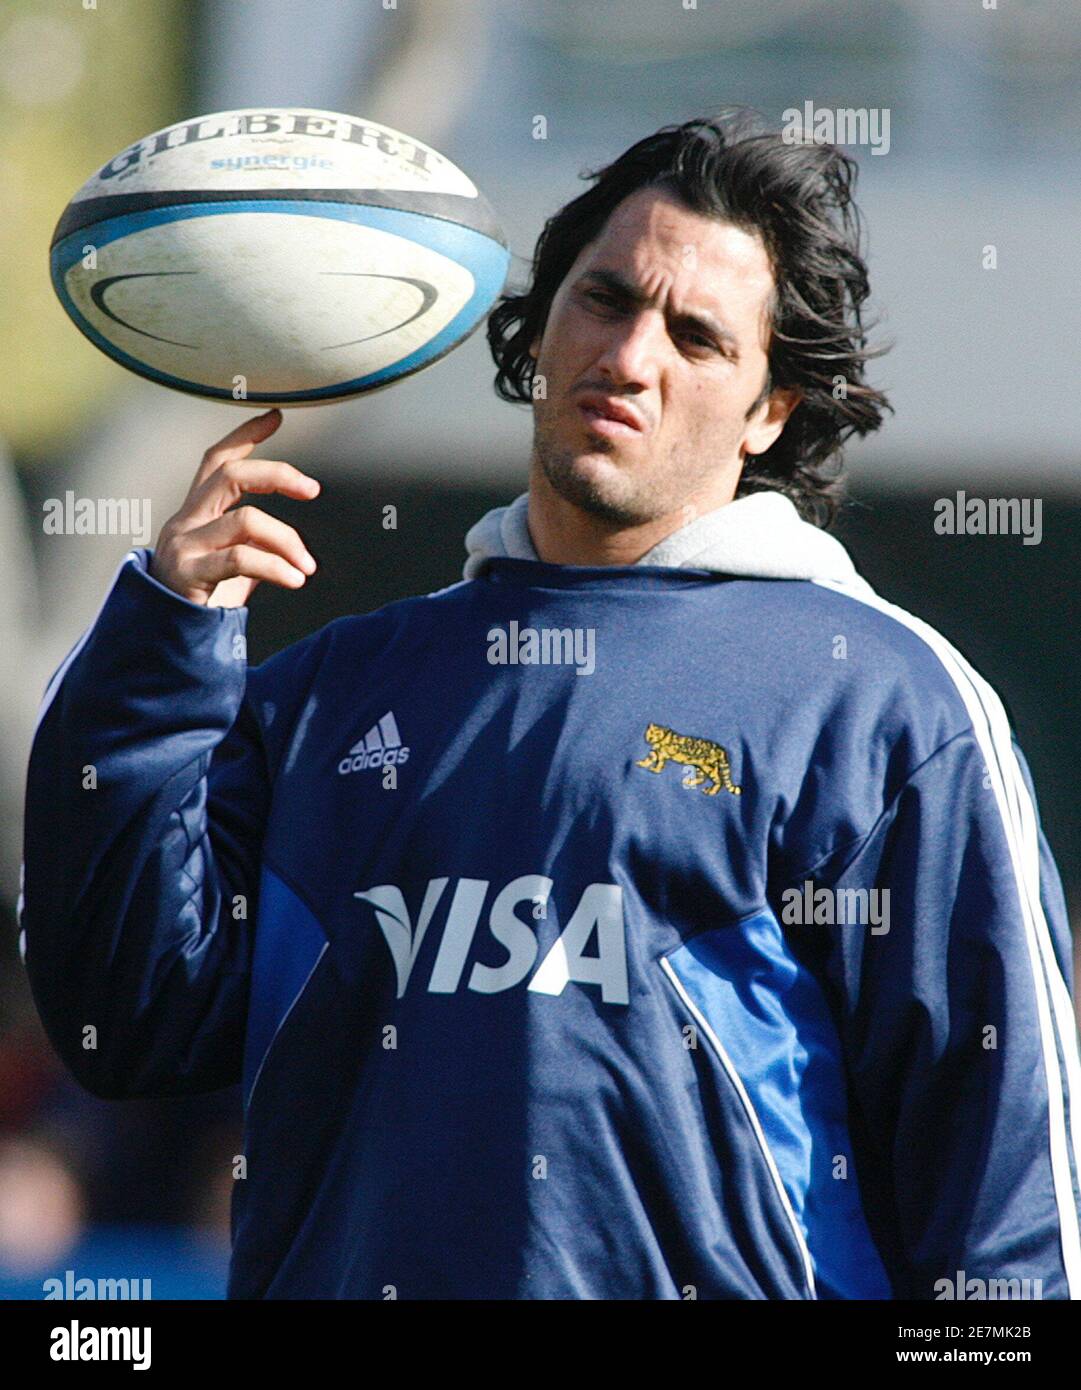 Agustin Pichot captain of the Argentine national rugby team Los Pumas  balances the ball during a training session in Buenos Aires ahead of the  France 2007 Rugby World Cup August 8, 2007.